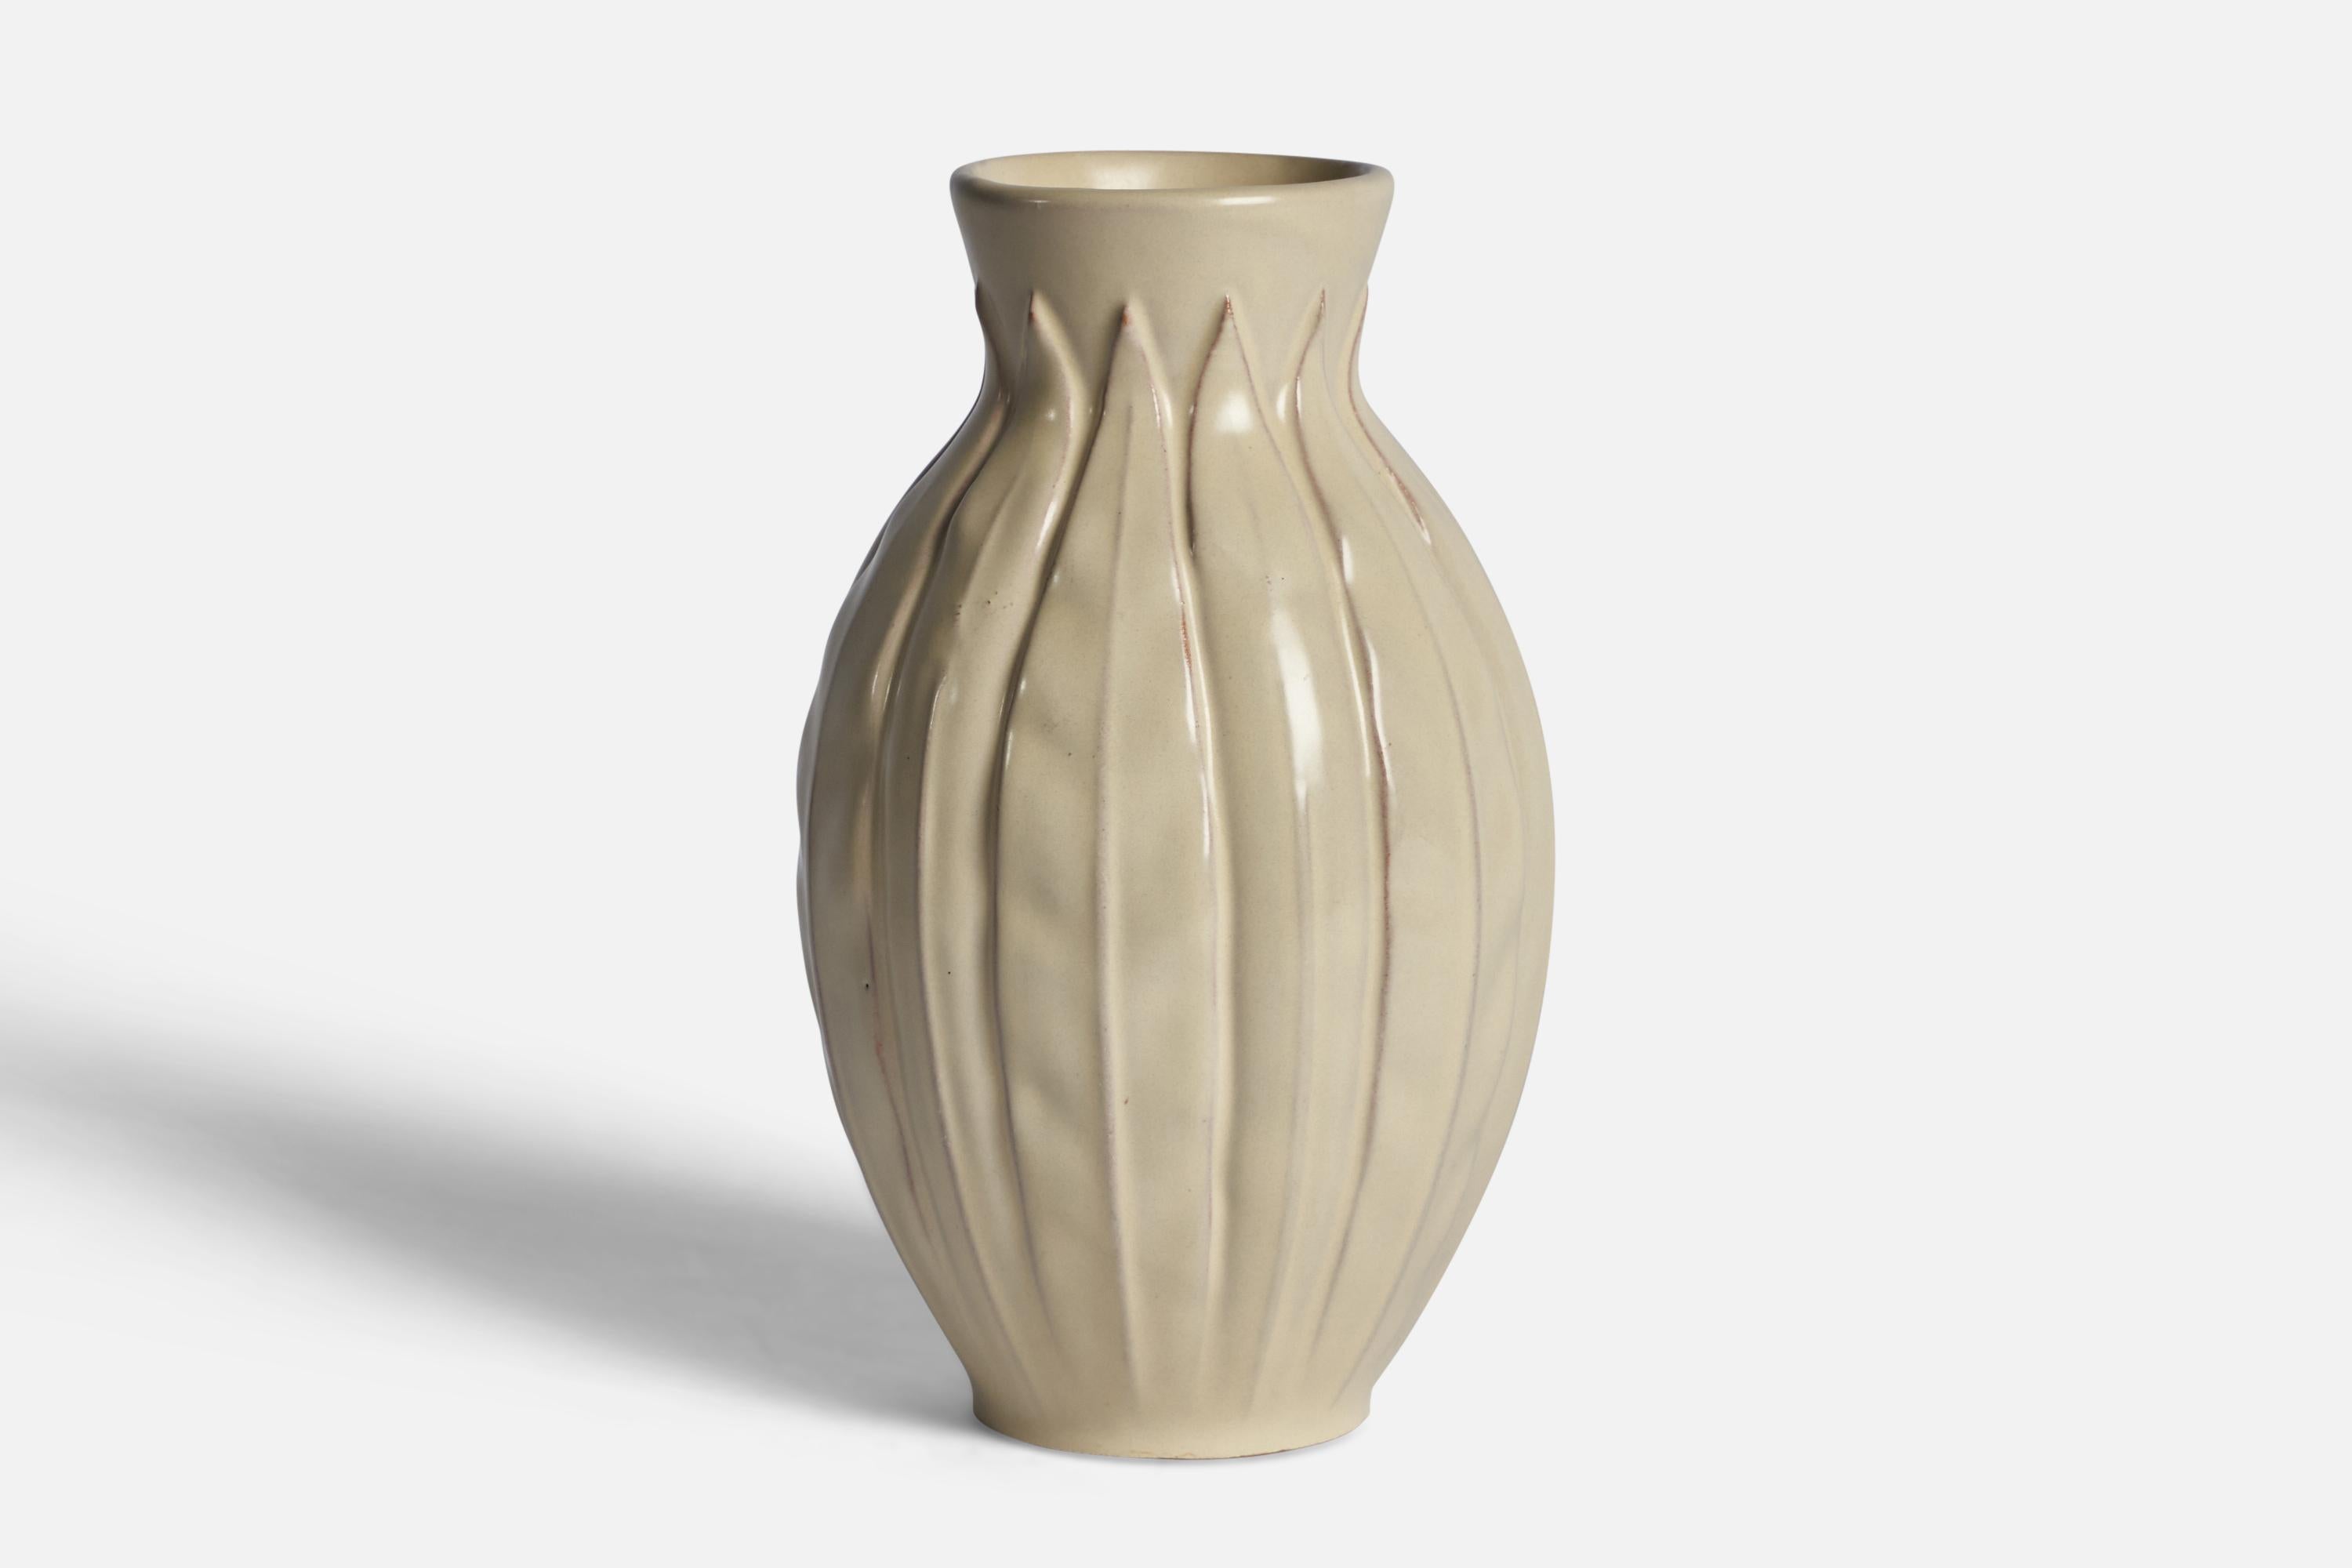 An off-white glazed earthenware vase designed by Anna-Lisa Thomson and produced by Upsala Ekeby, Sweden, 1930s.